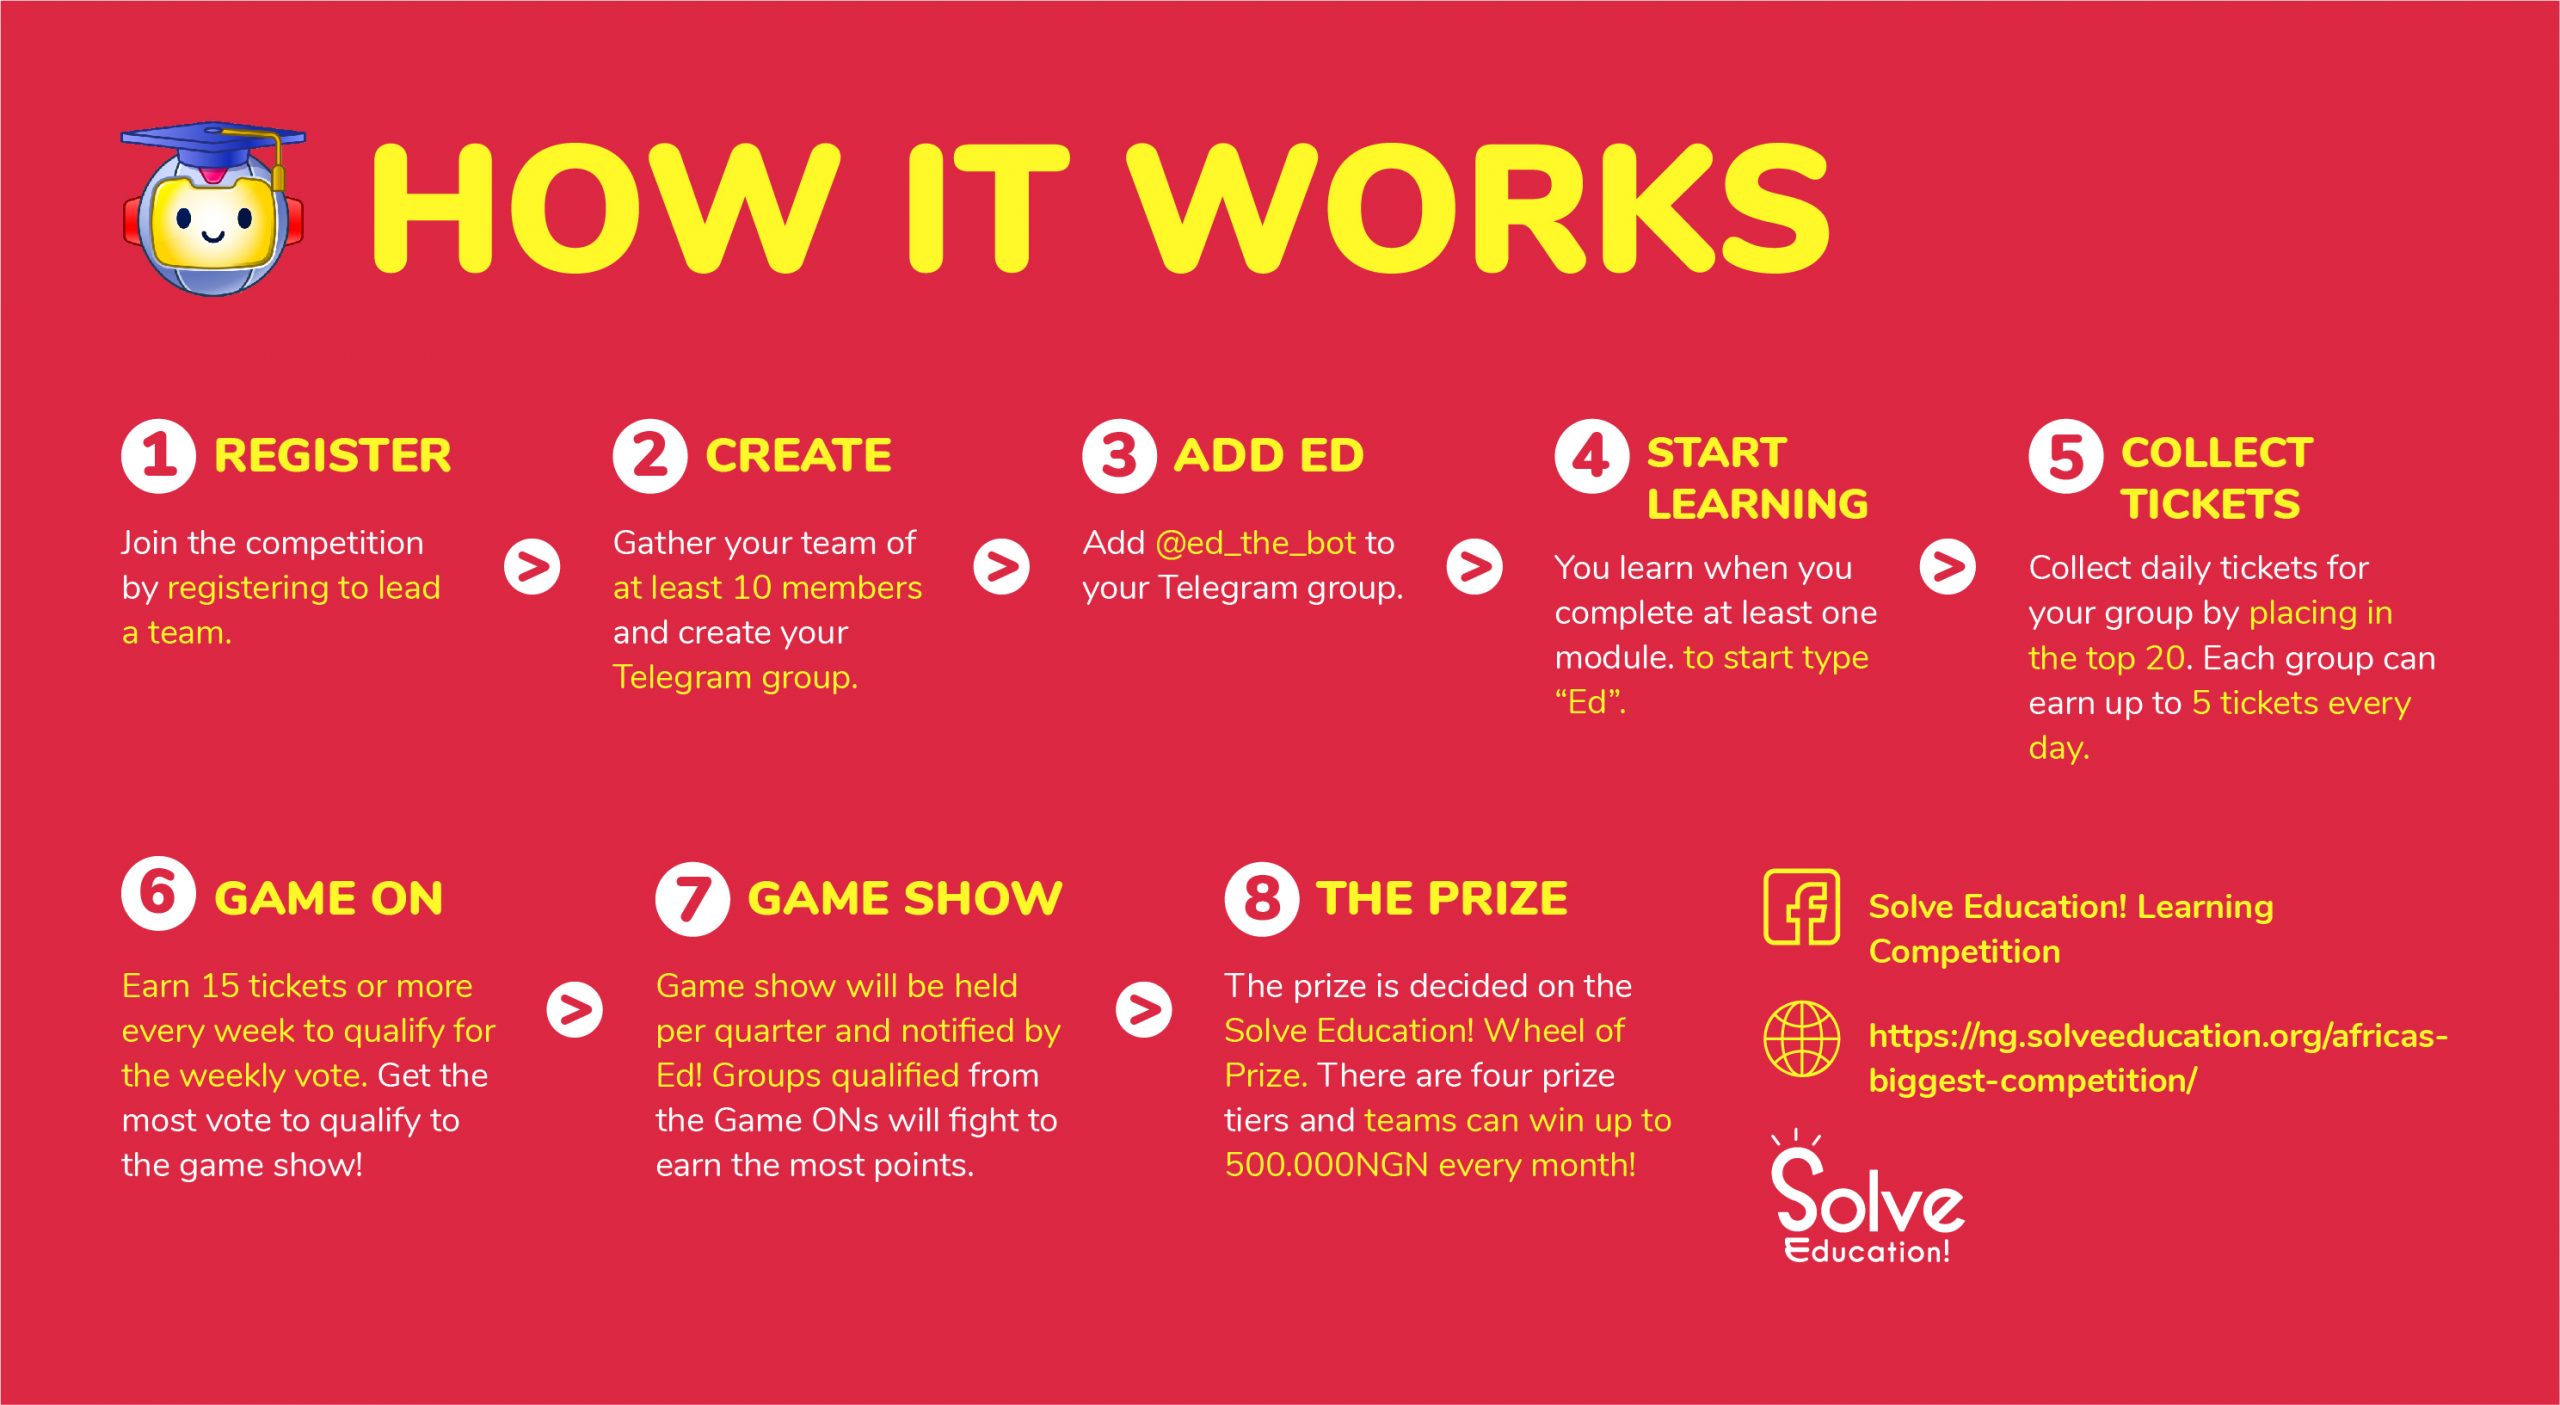 How to compete in Solve Education Learning Competition